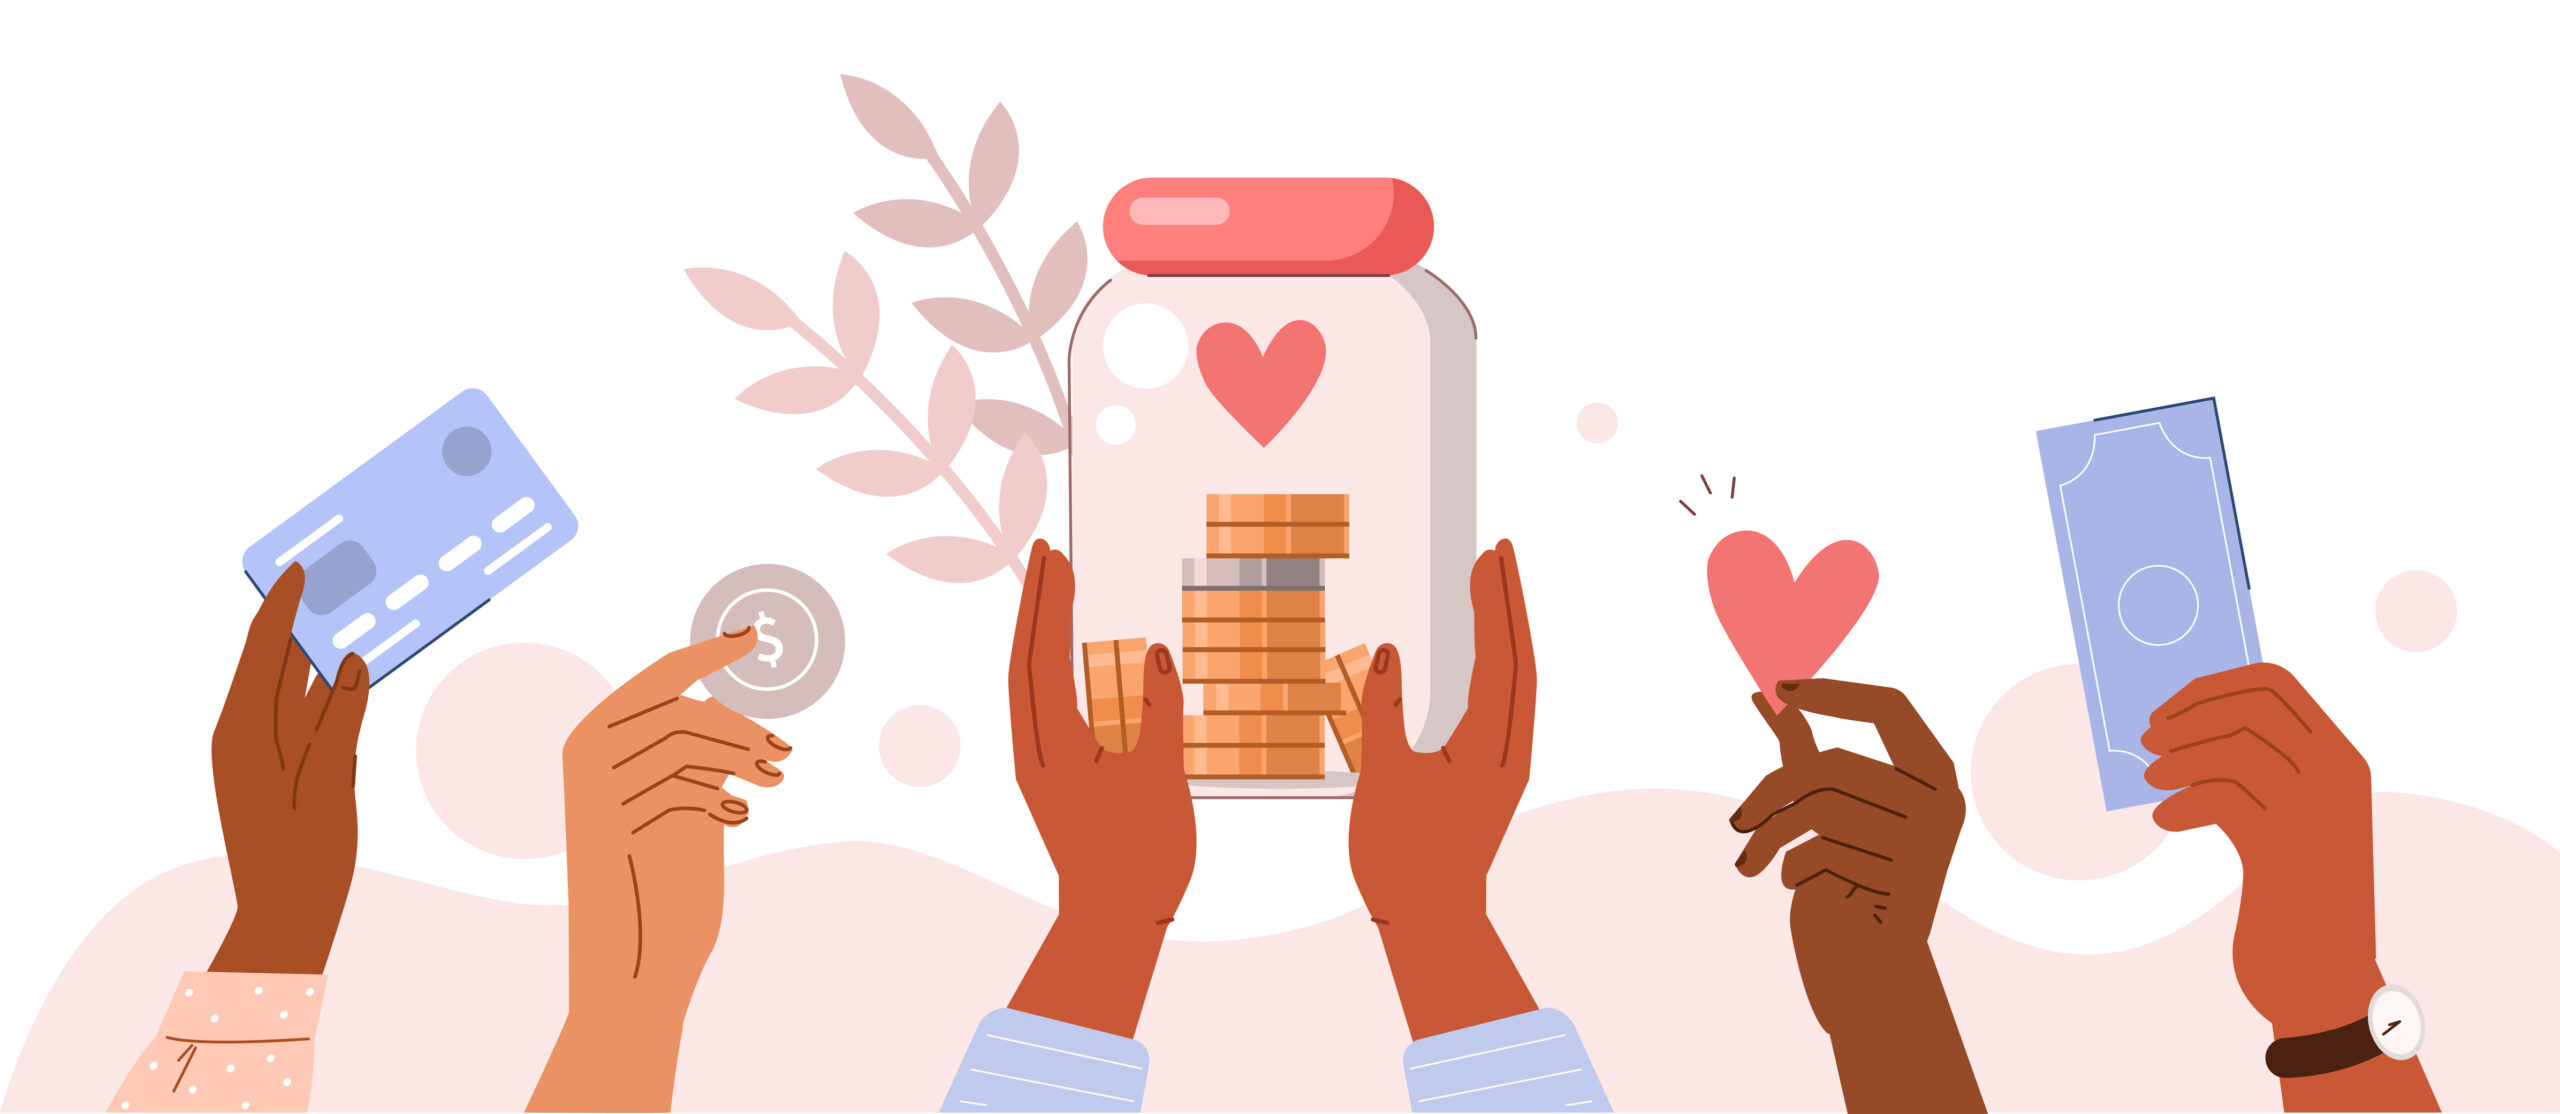 People hands holding donation jar with coins and donating money for charity. Volunteers collecting charitable donations. Charity financial support concept. Flat cartoon vector illustration.